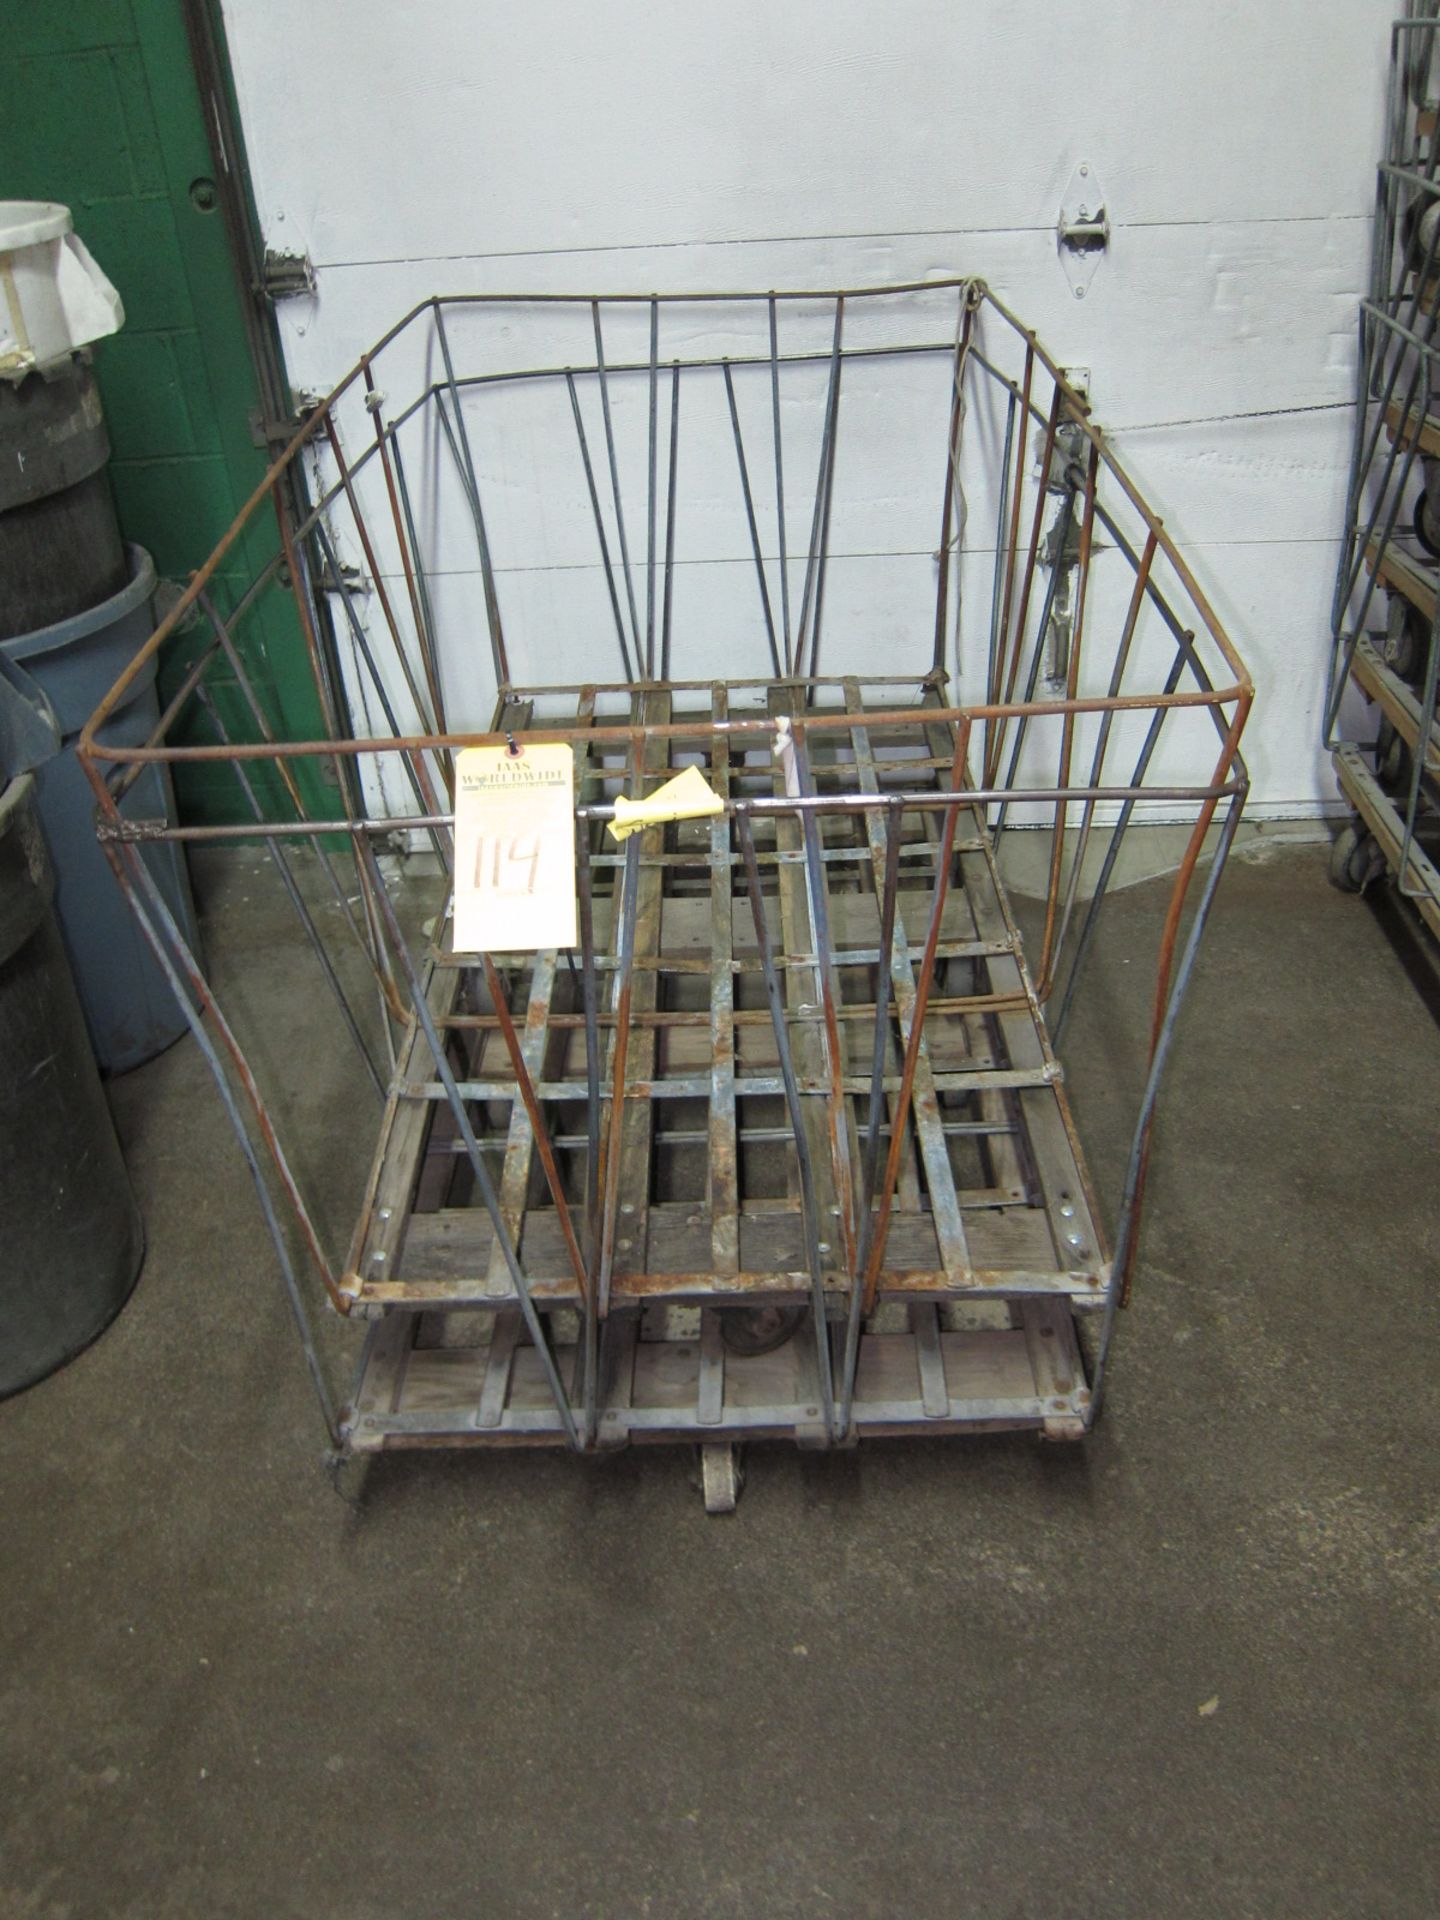 (2) 60" X 32" WIRE LAUNDRY CARTS